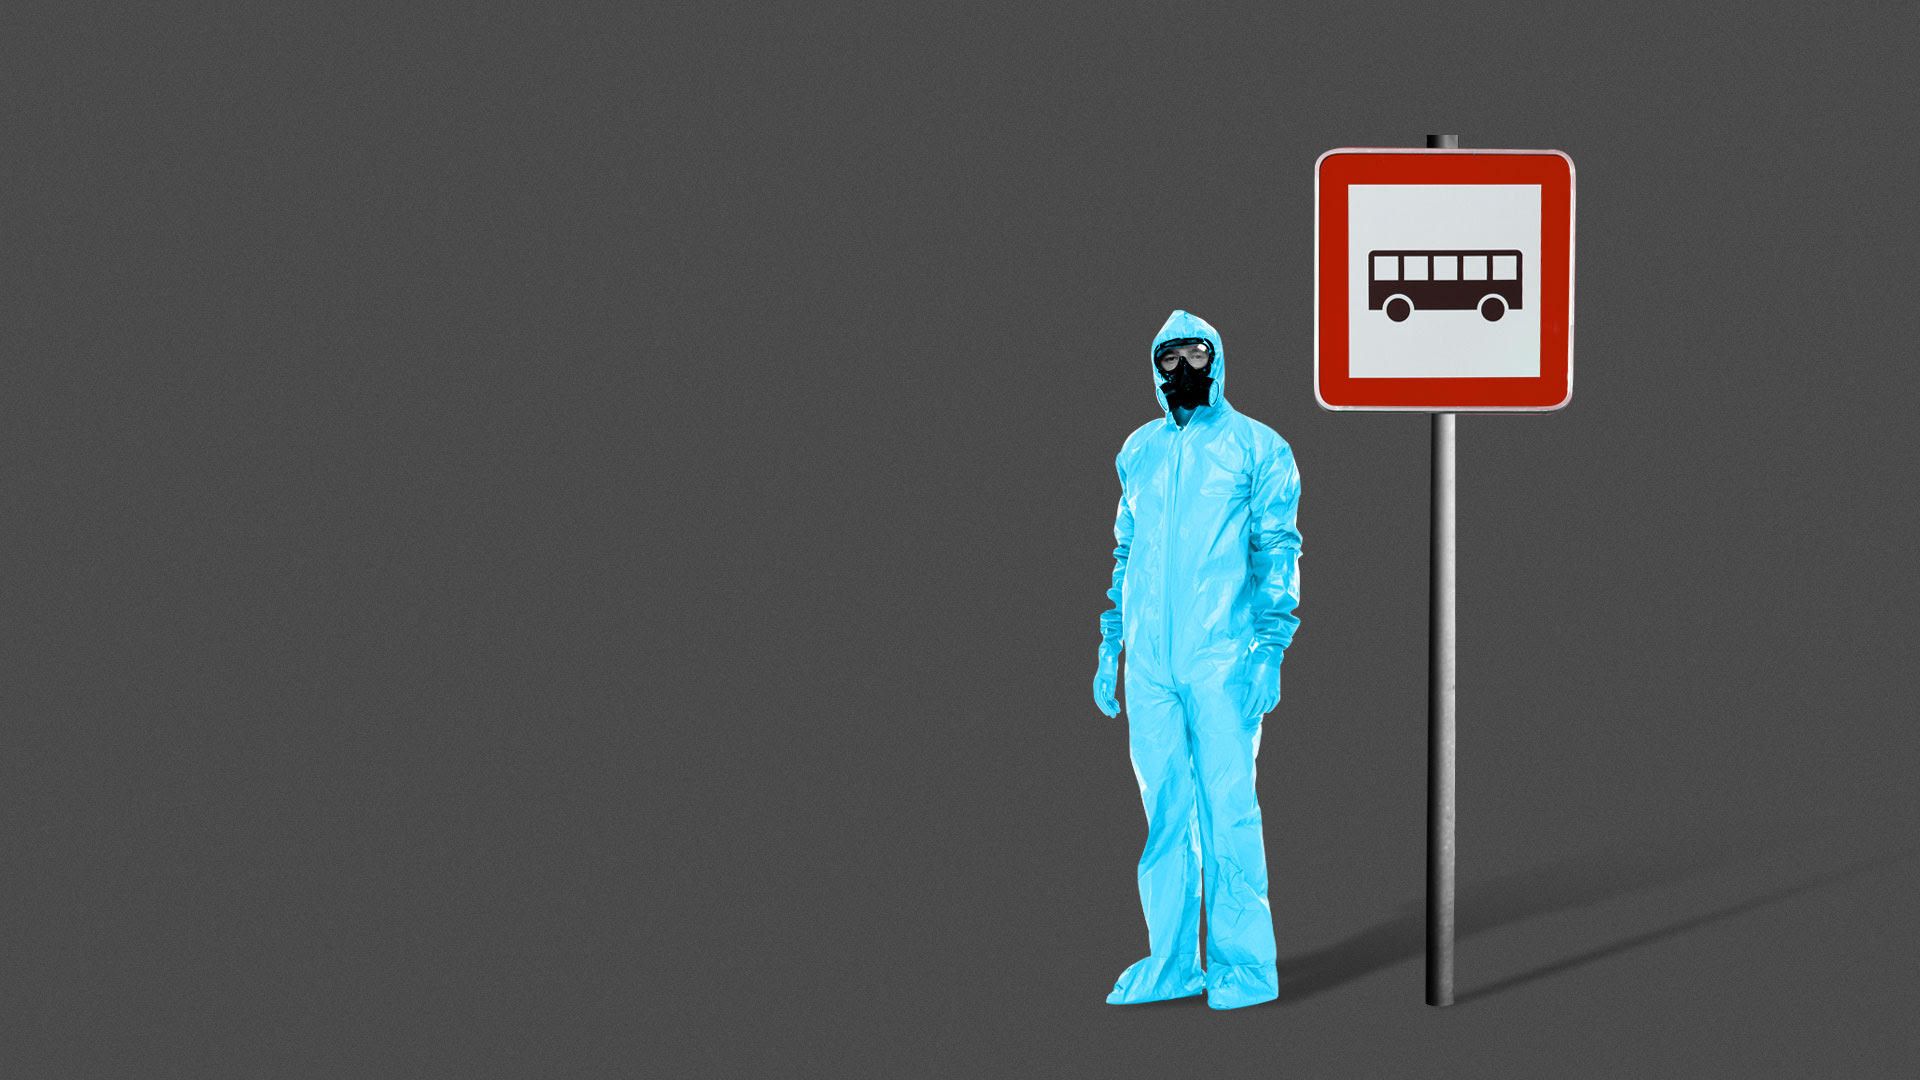 Illustration of person in hazmat suit standing next to bus sign.